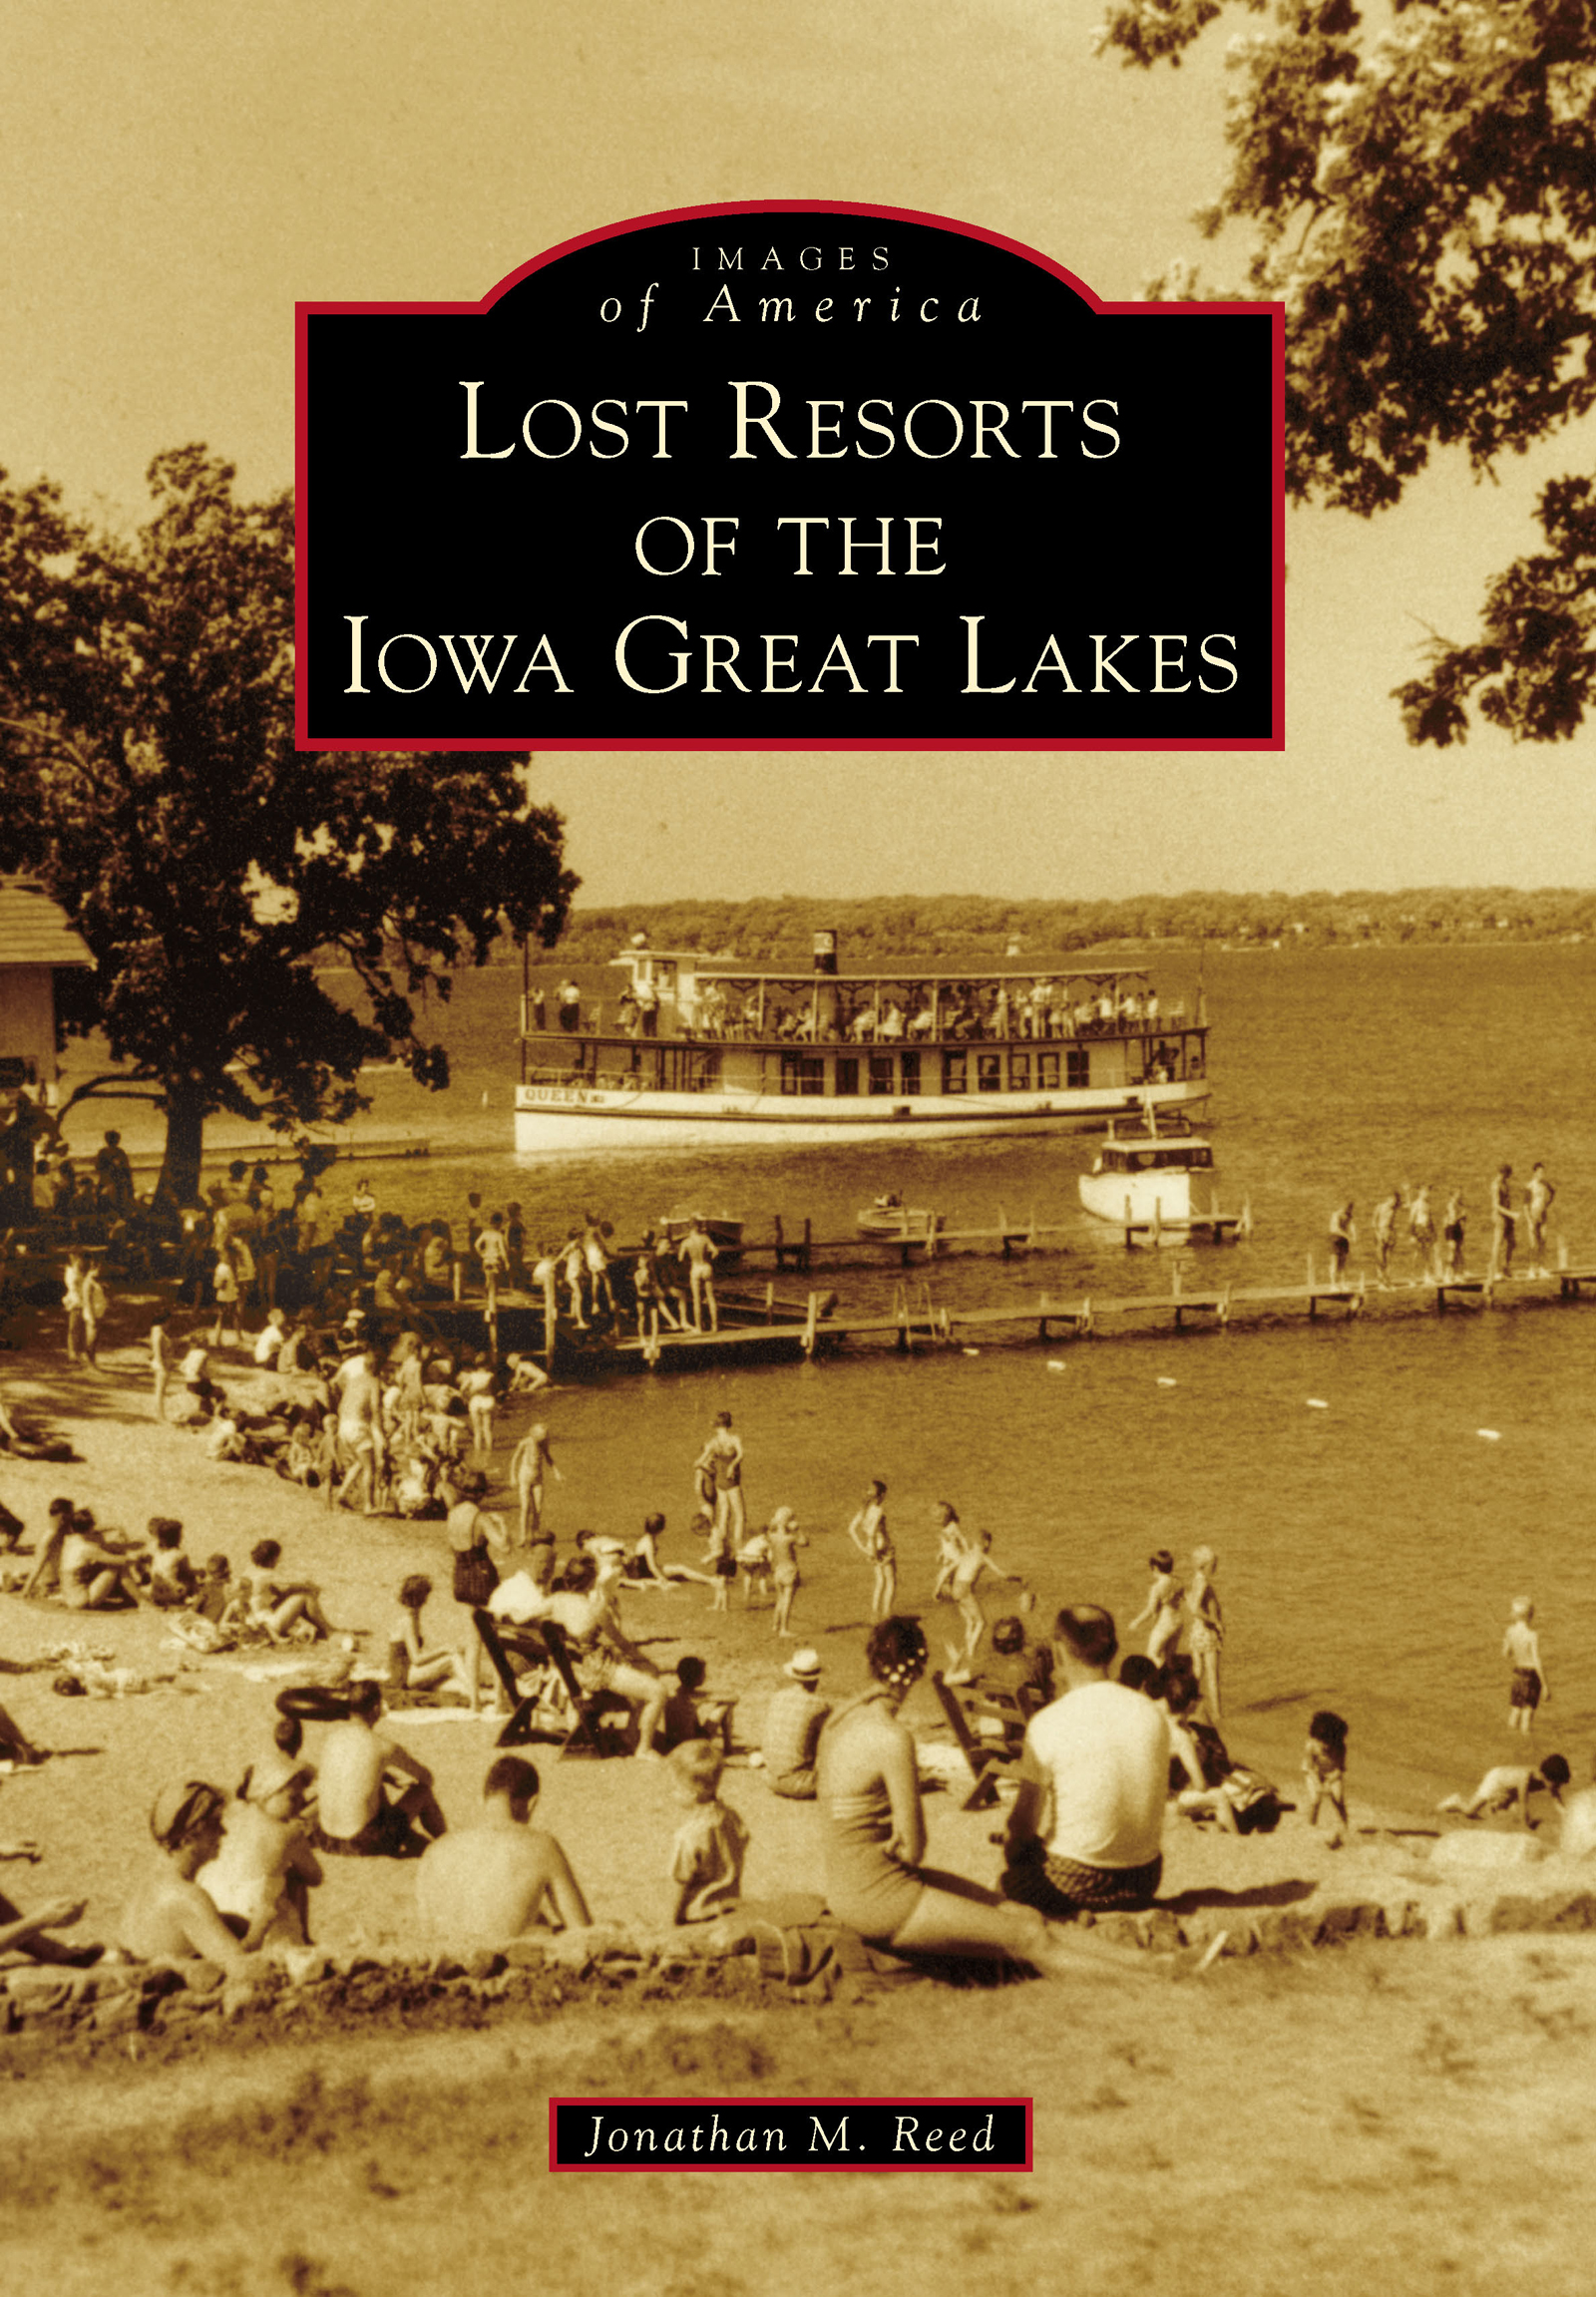 This image is the cover for the book Lost Resorts of the Iowa Great Lakes, Images of America